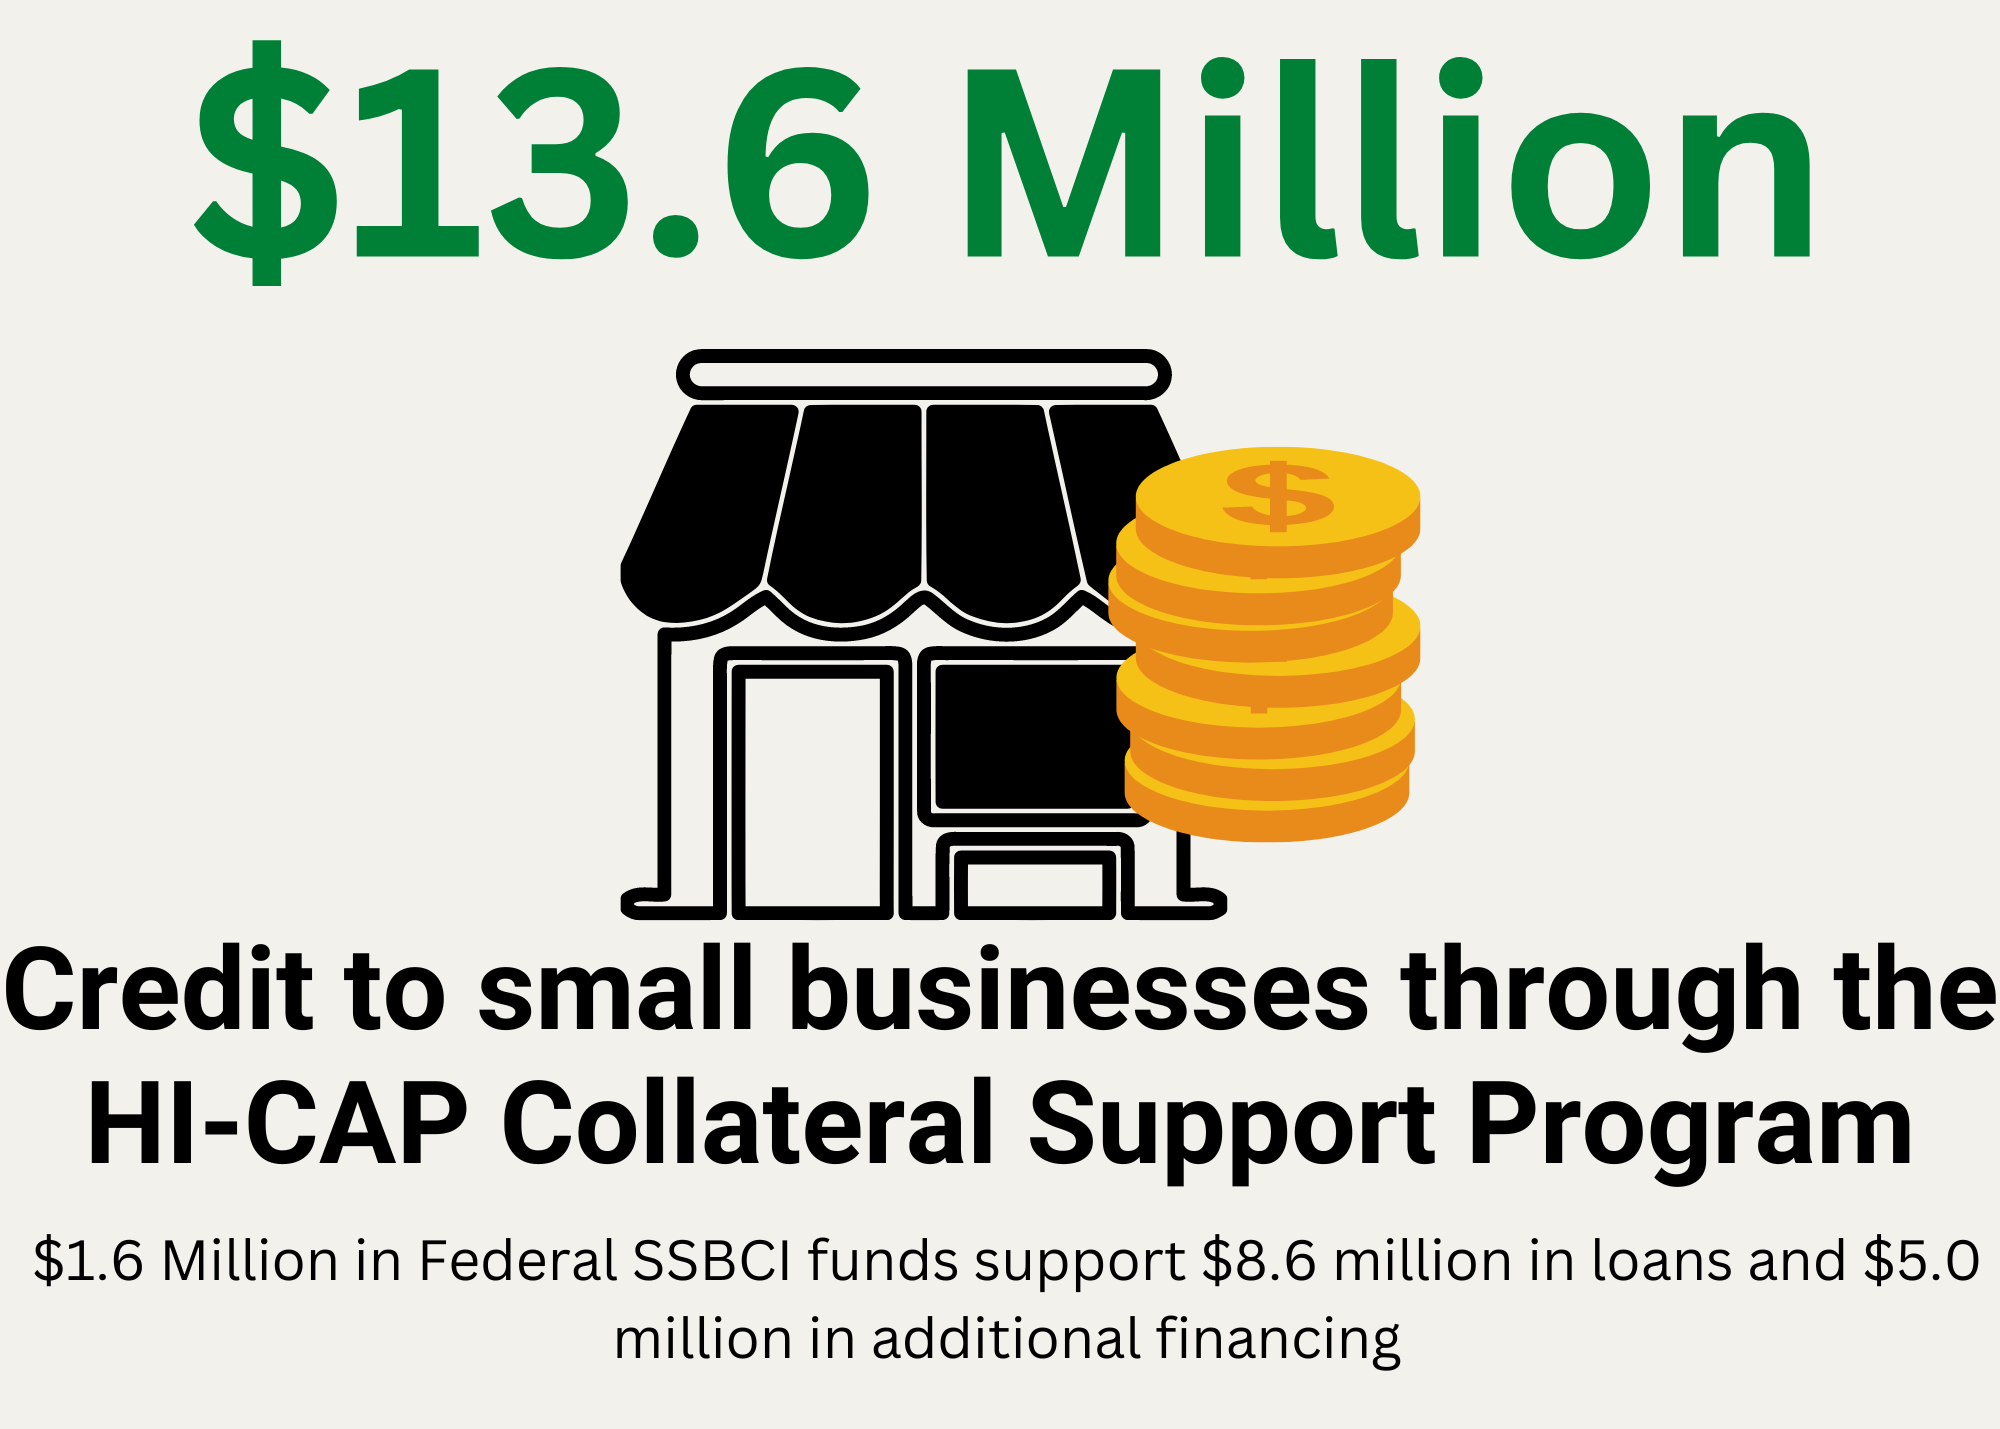 $13.6 million in credit to small businesses through the HI-CAP Collateral Support Program ($1.6 million in Federal SSBCI funds support $8.6 million in loans and $5.0 million in additional financing